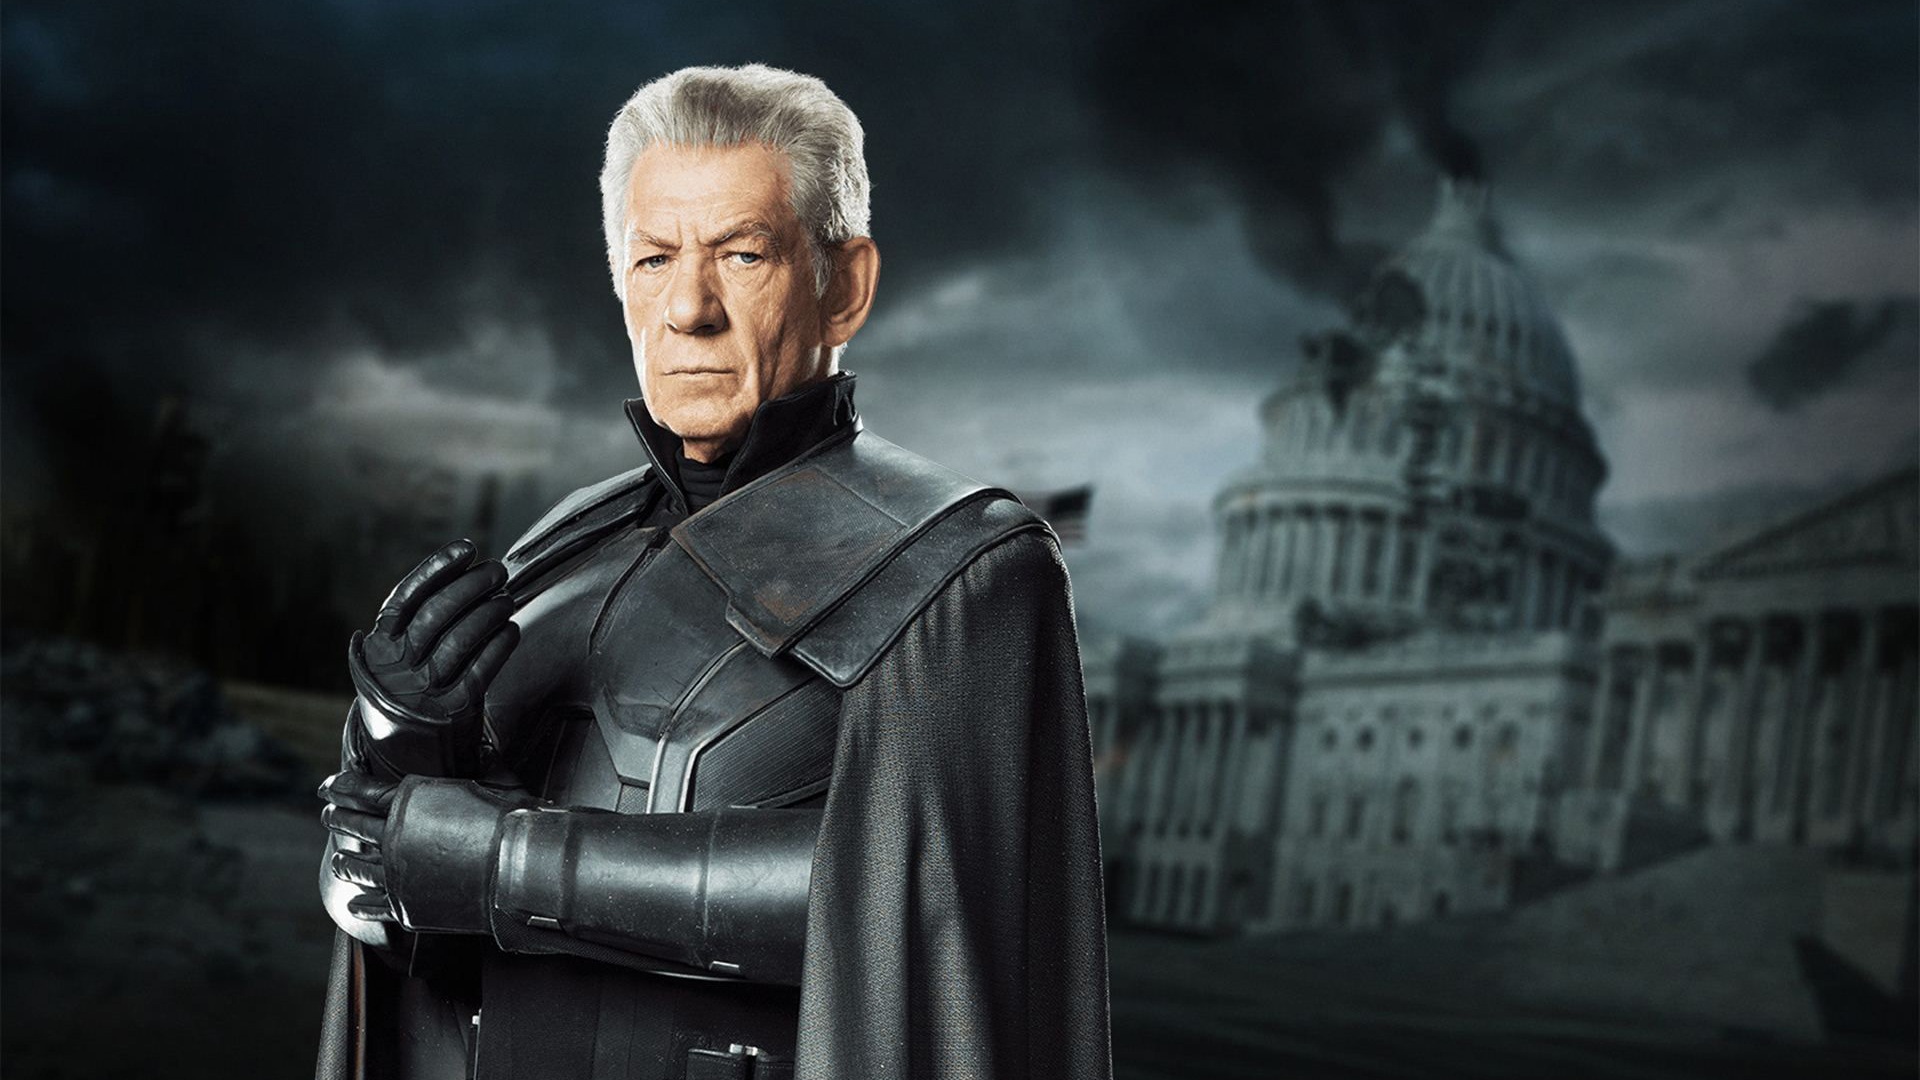 2014 X-Men: Days of Future Past HD wallpapers #13 - 1920x1080